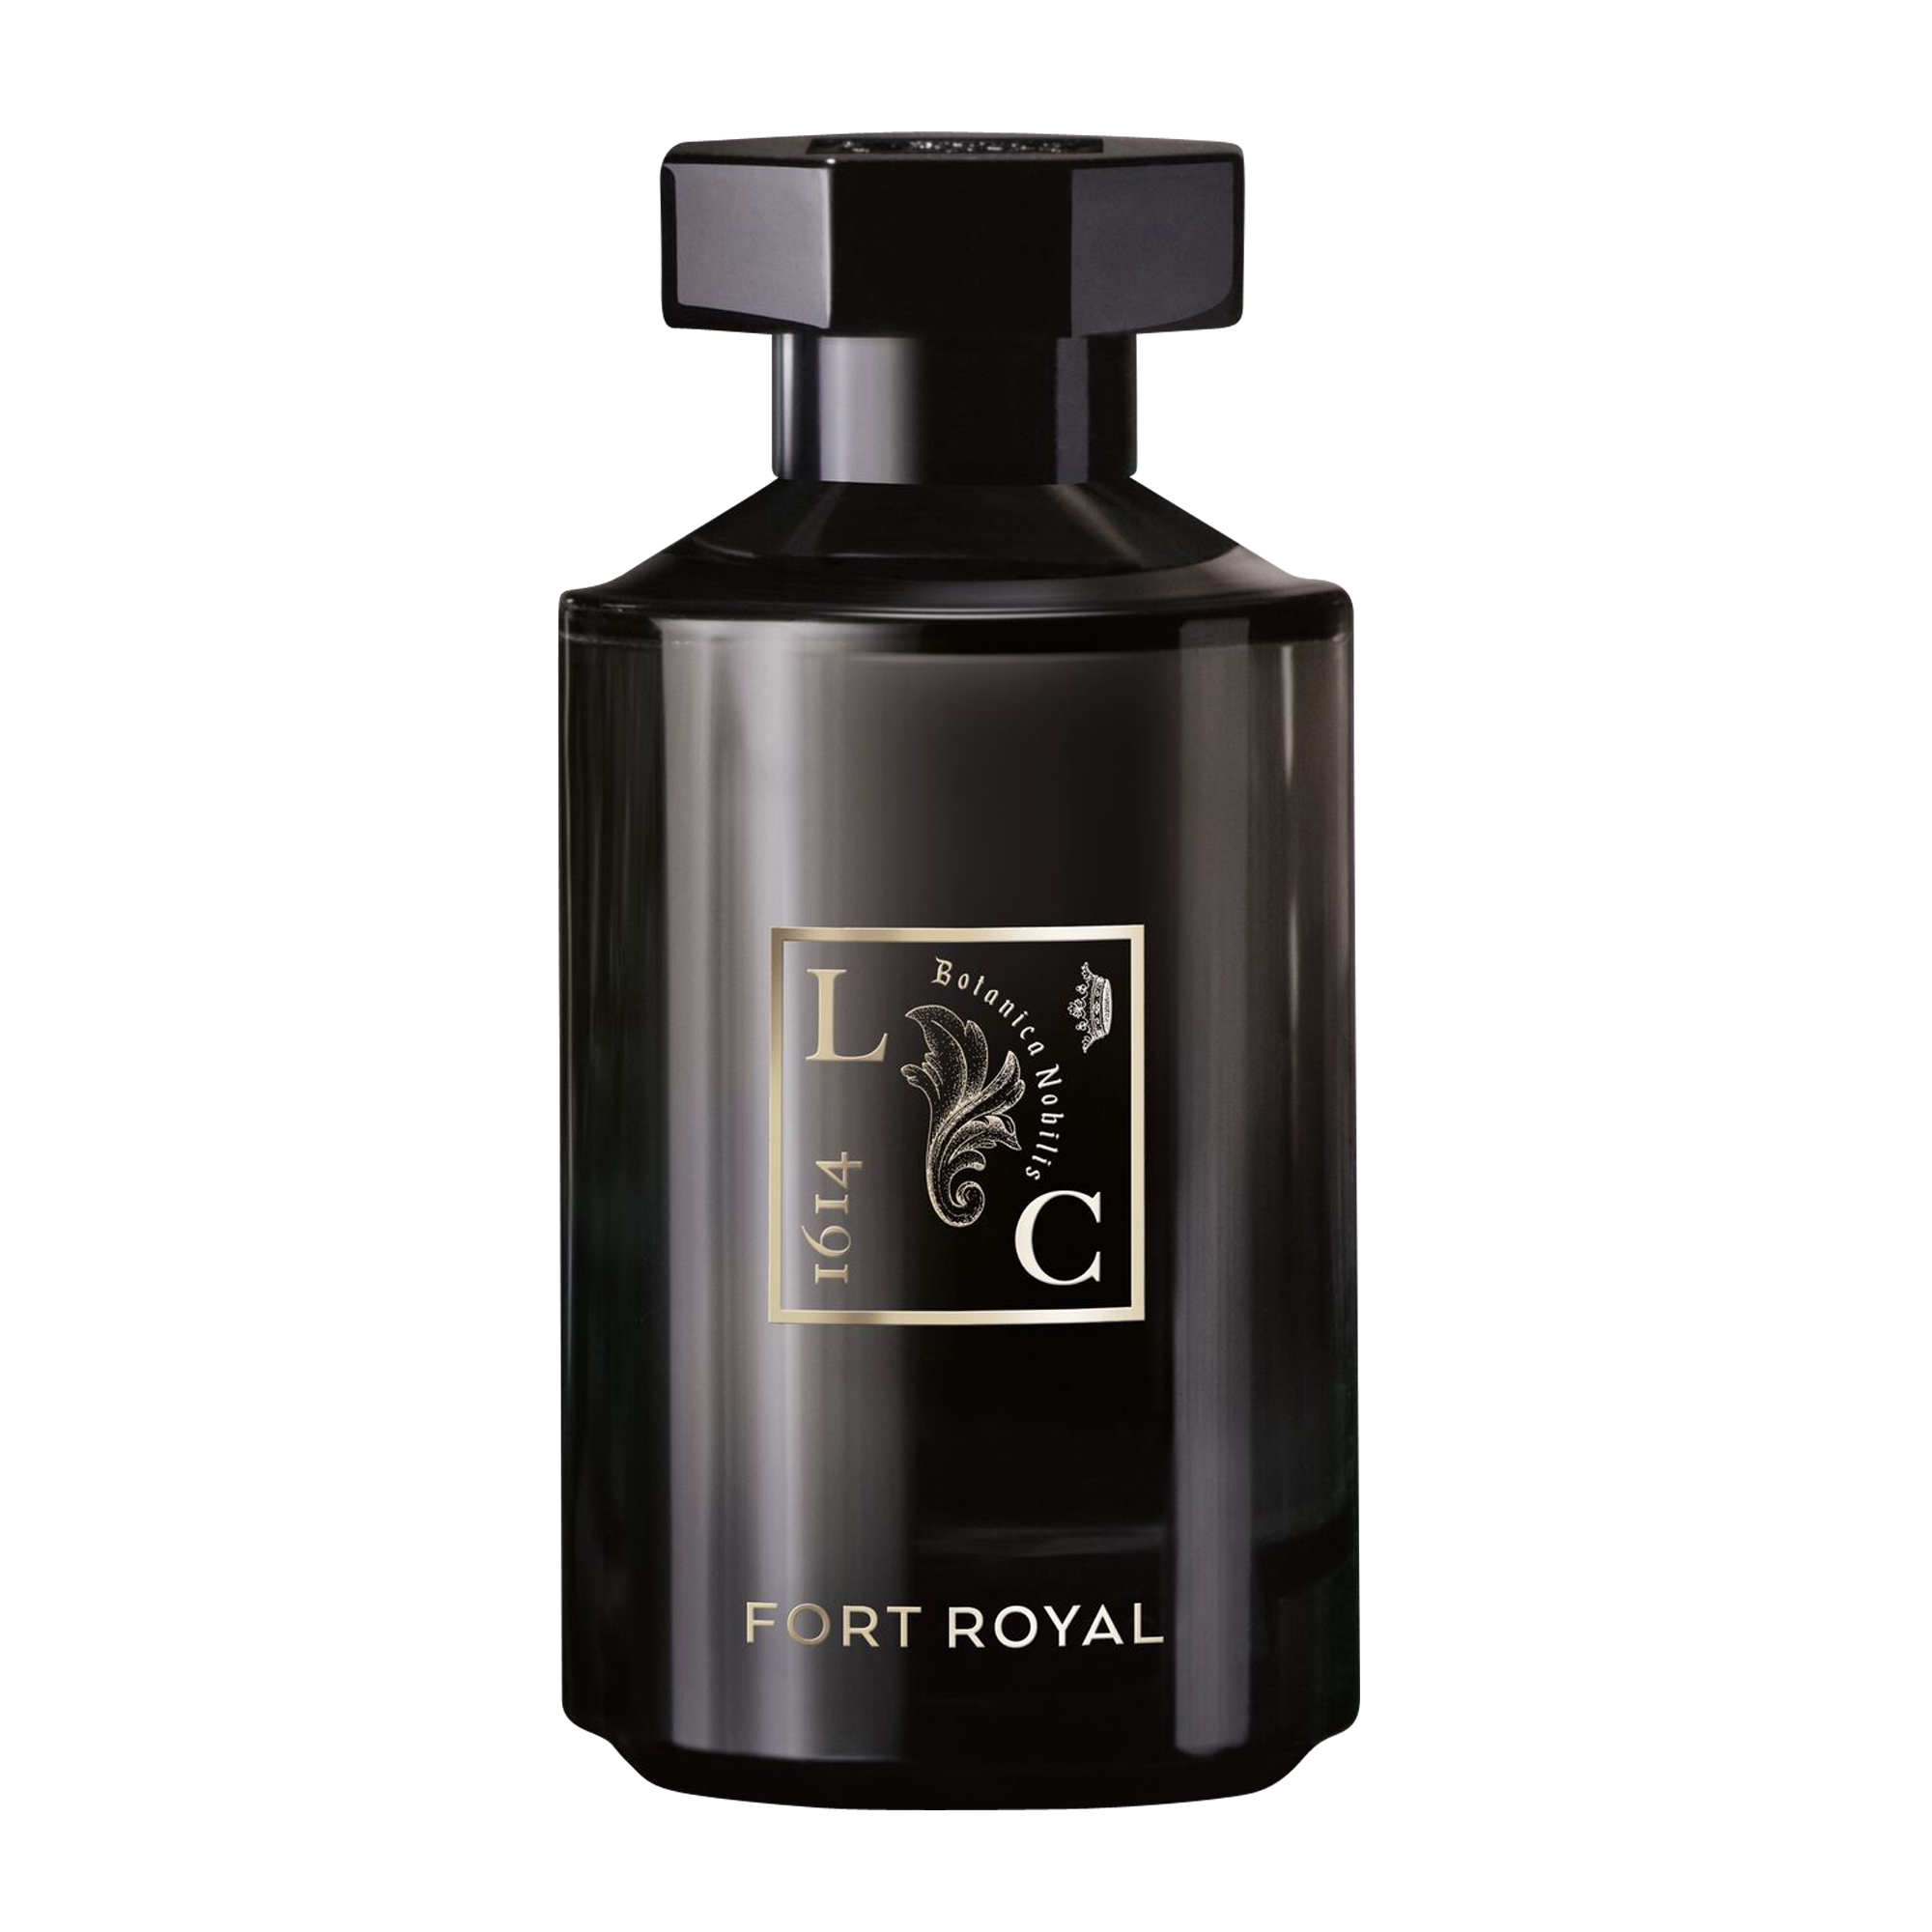 Le Couvent - Remarkable Perfume Fort Royal EDP 100 ml